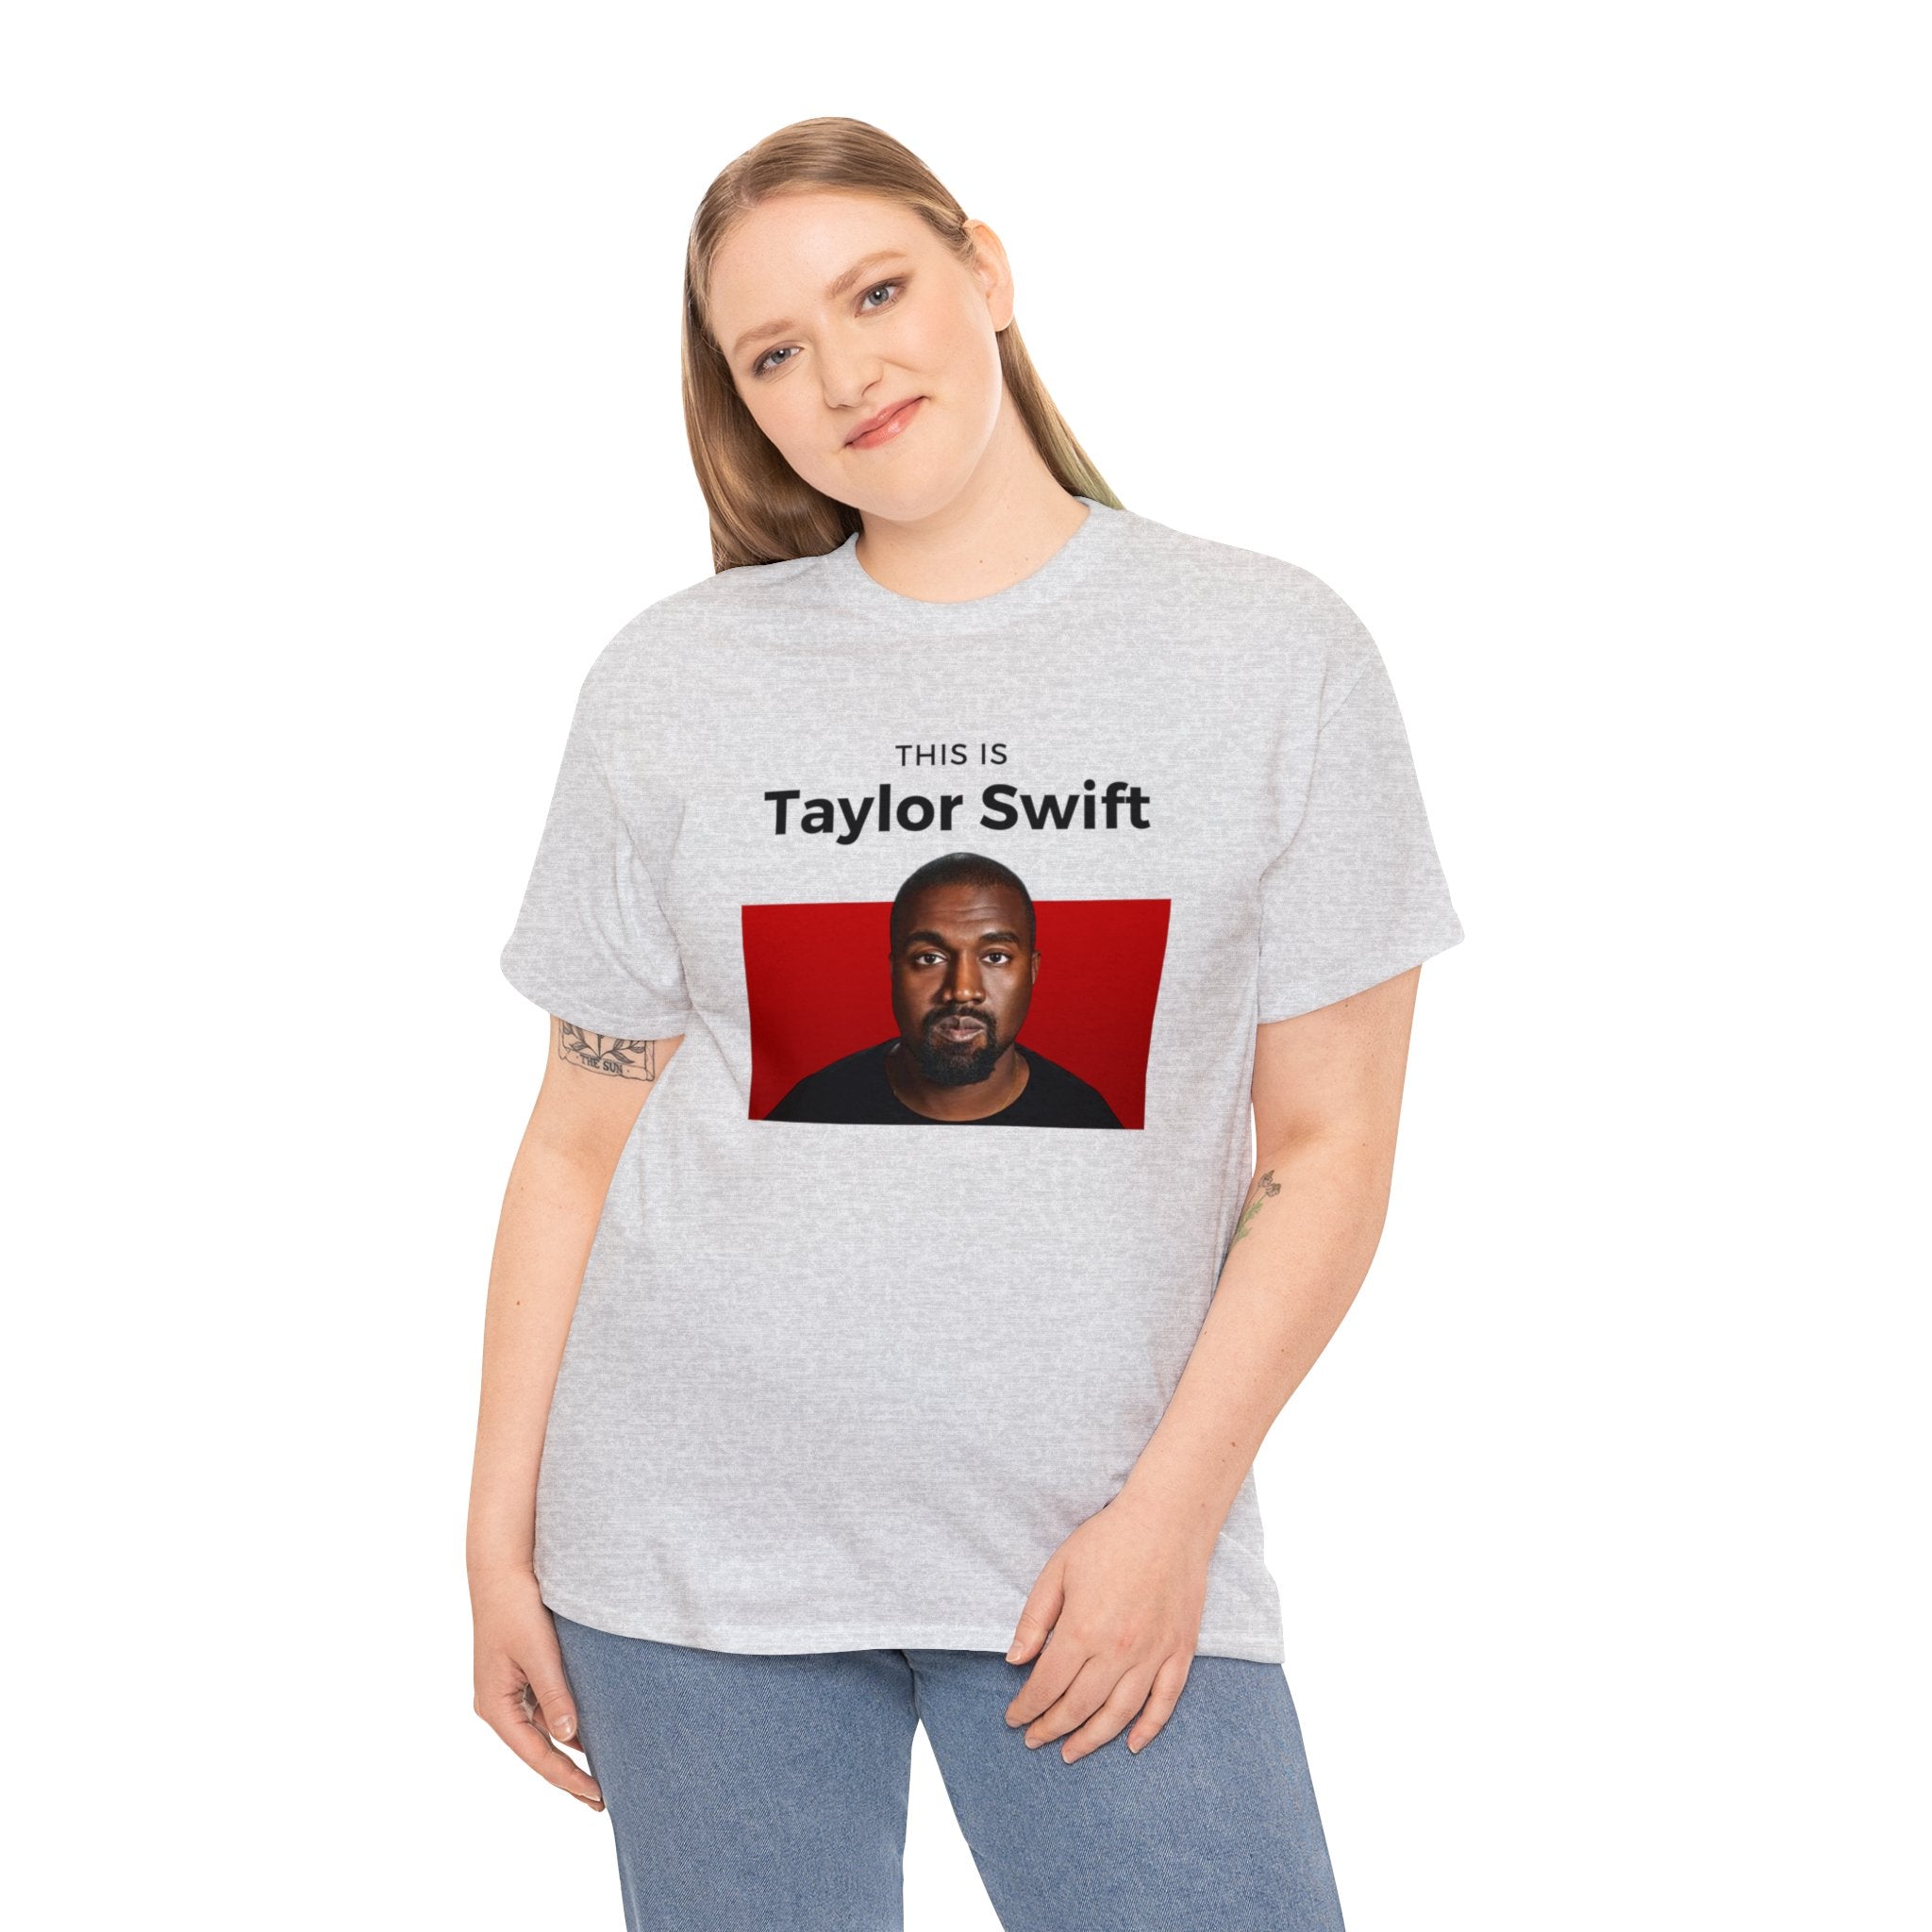 This is Taylor Swift (Kanye West) - Unisex Heavy Cotton Tee